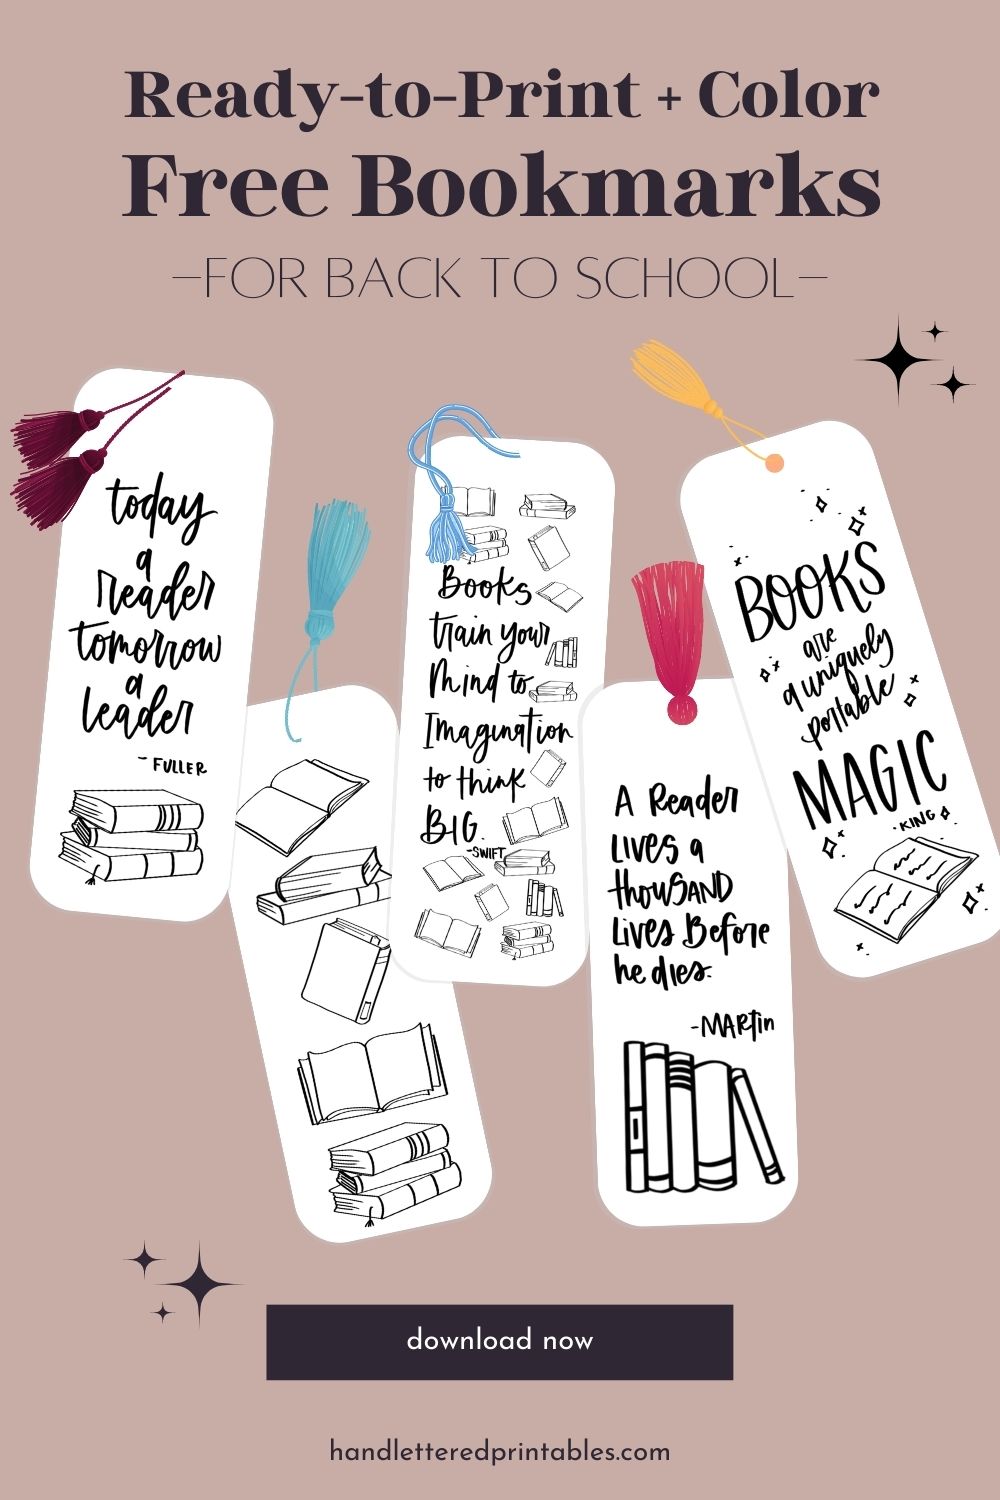 Free printable bookmarks with quotes about reading- mockup shows printed bookmarks with tassels and text over